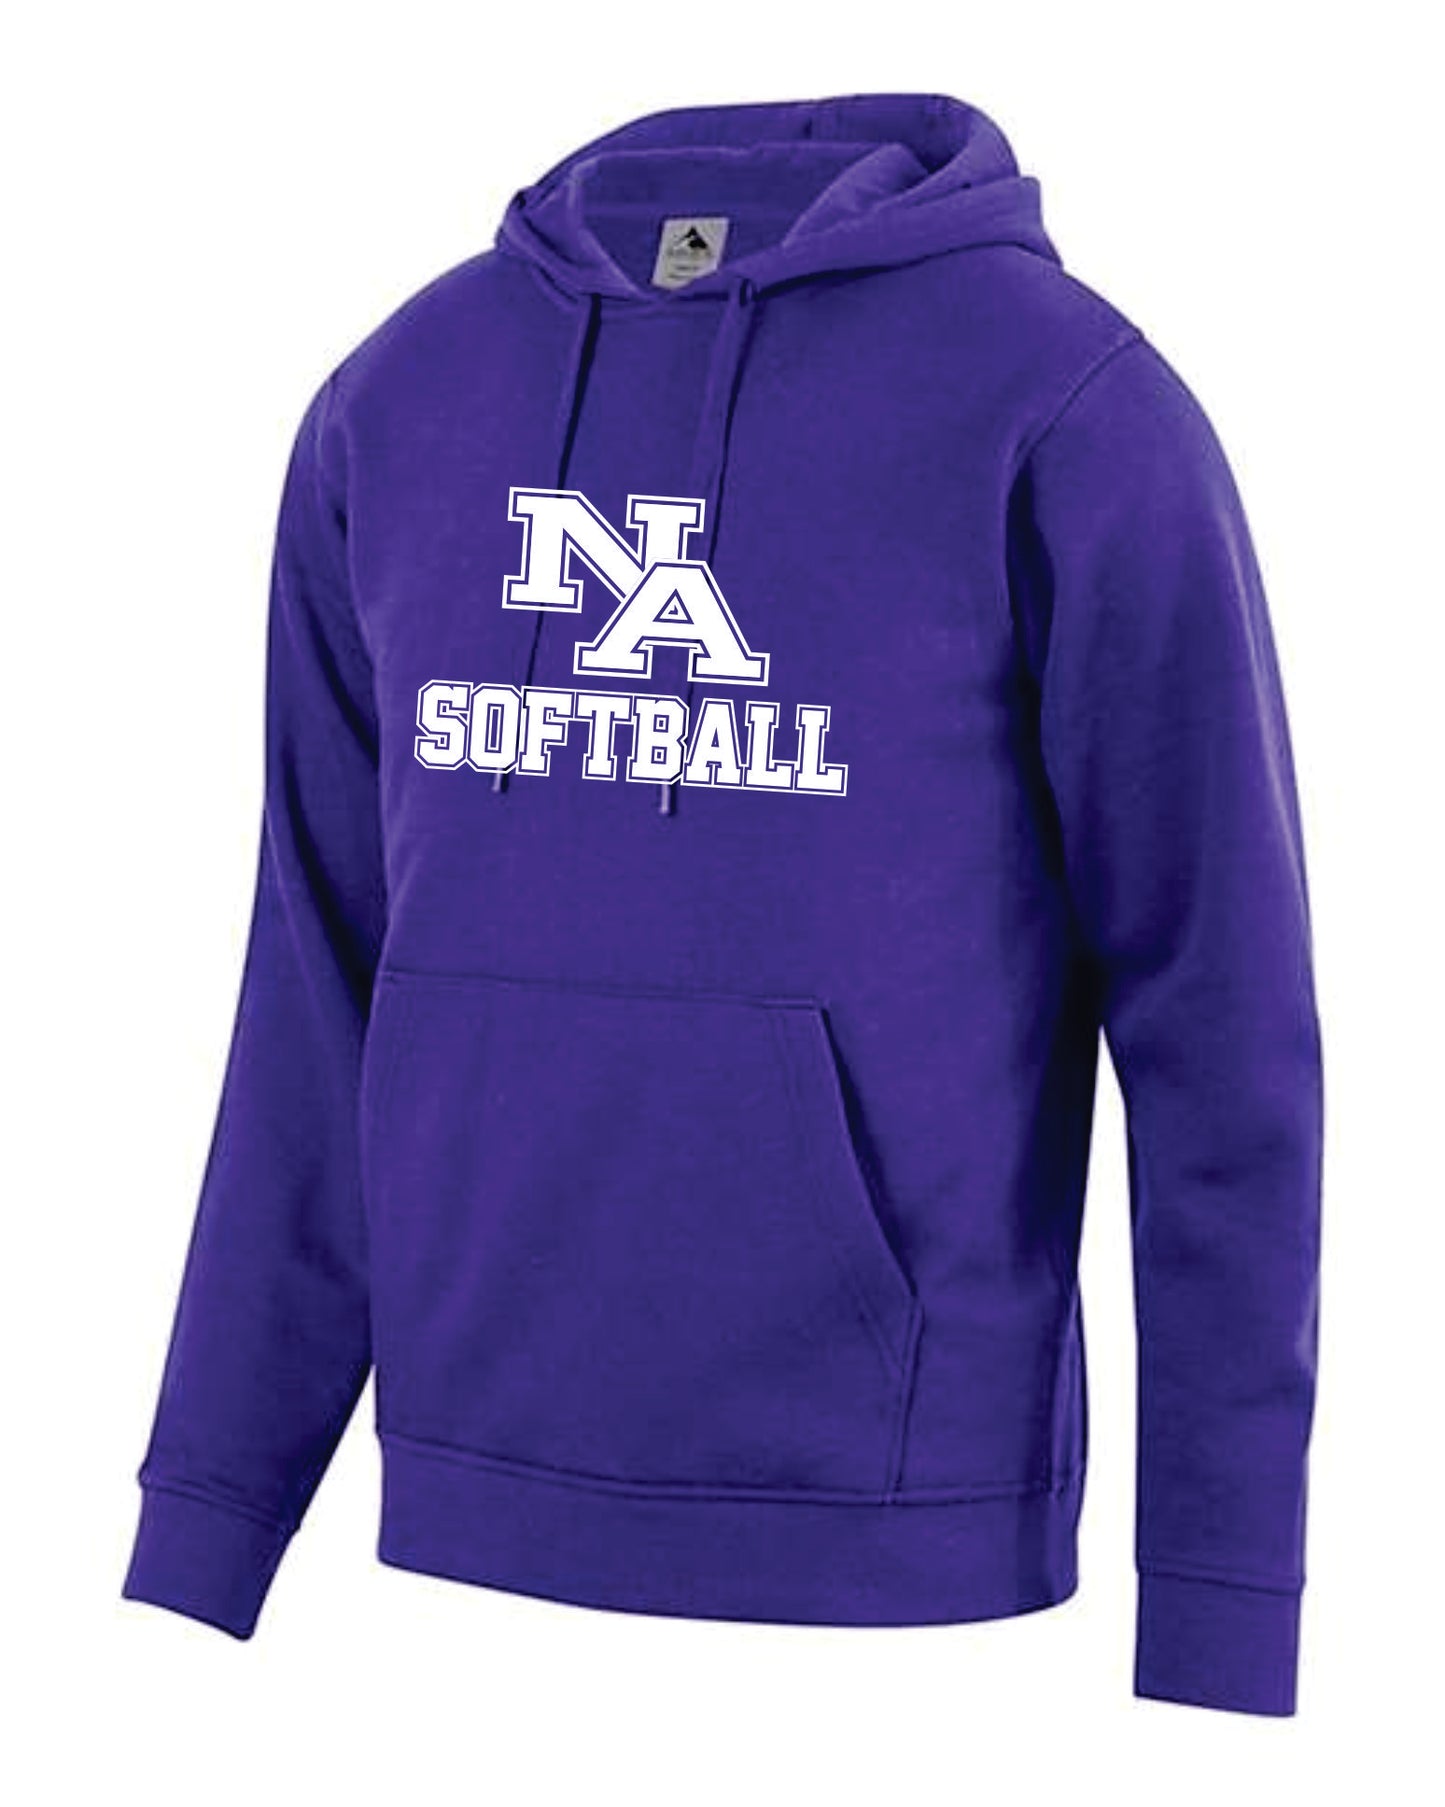 Softball Team Hoodie - (3 colors) - APPROVED SCHOOL ATTIRE